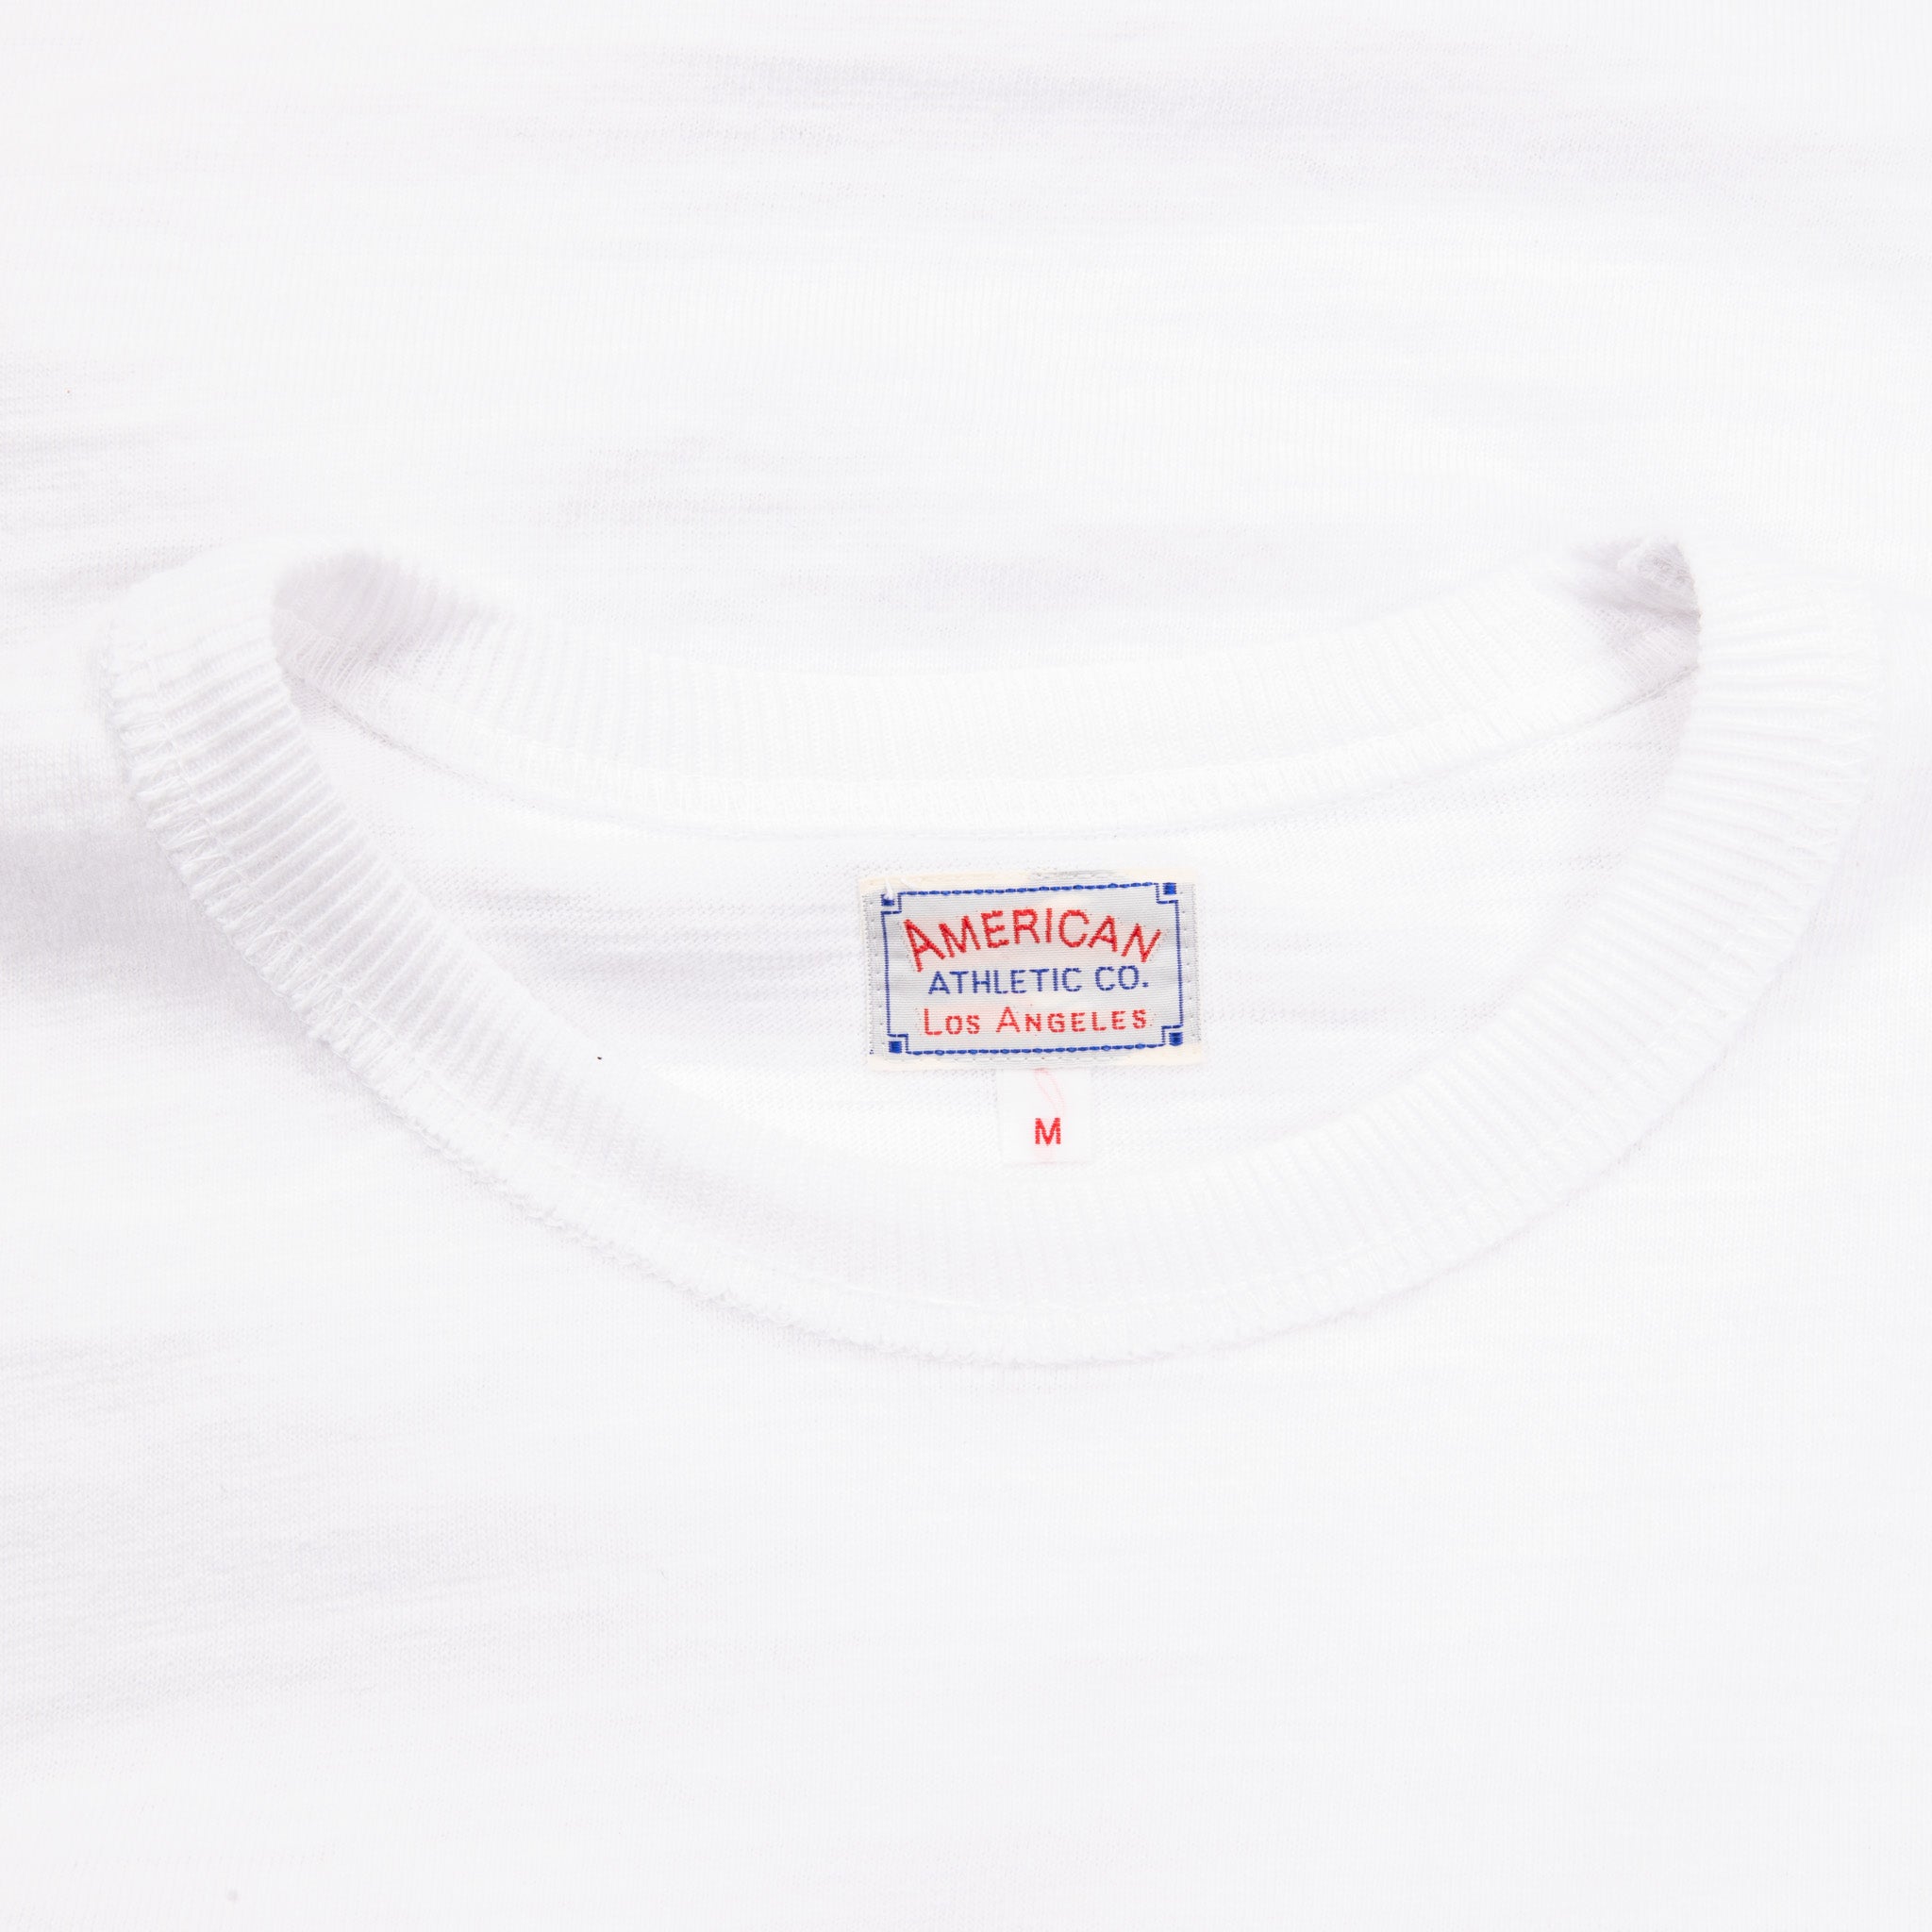 The Real McCoy&#39;s Athletic L/S T-shirt / Loopwheel White